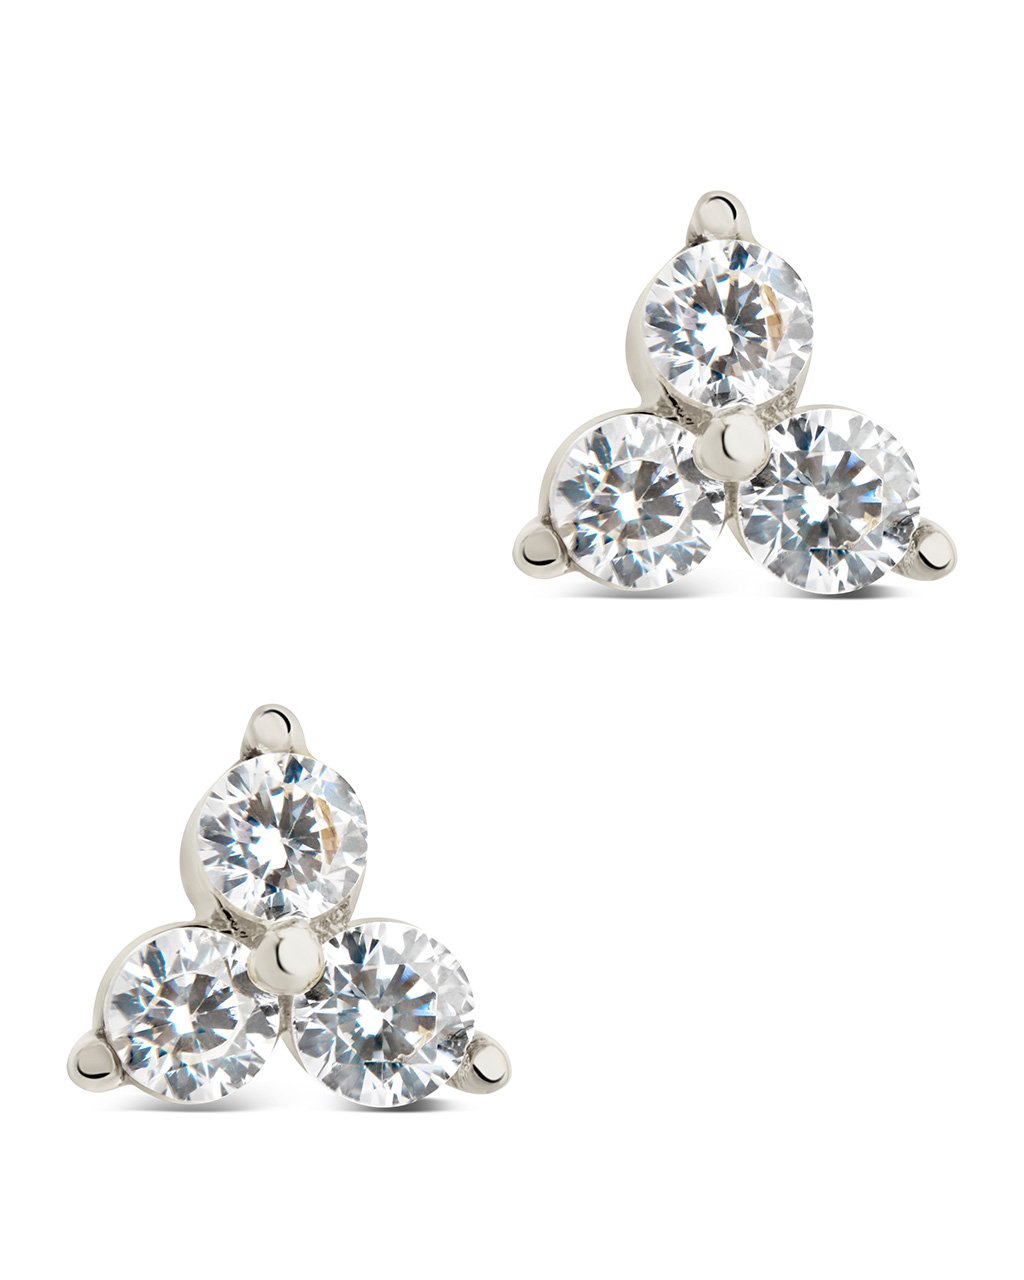 Sterling Silver CZ Pyramid Studs Earring Sterling Forever Silver 